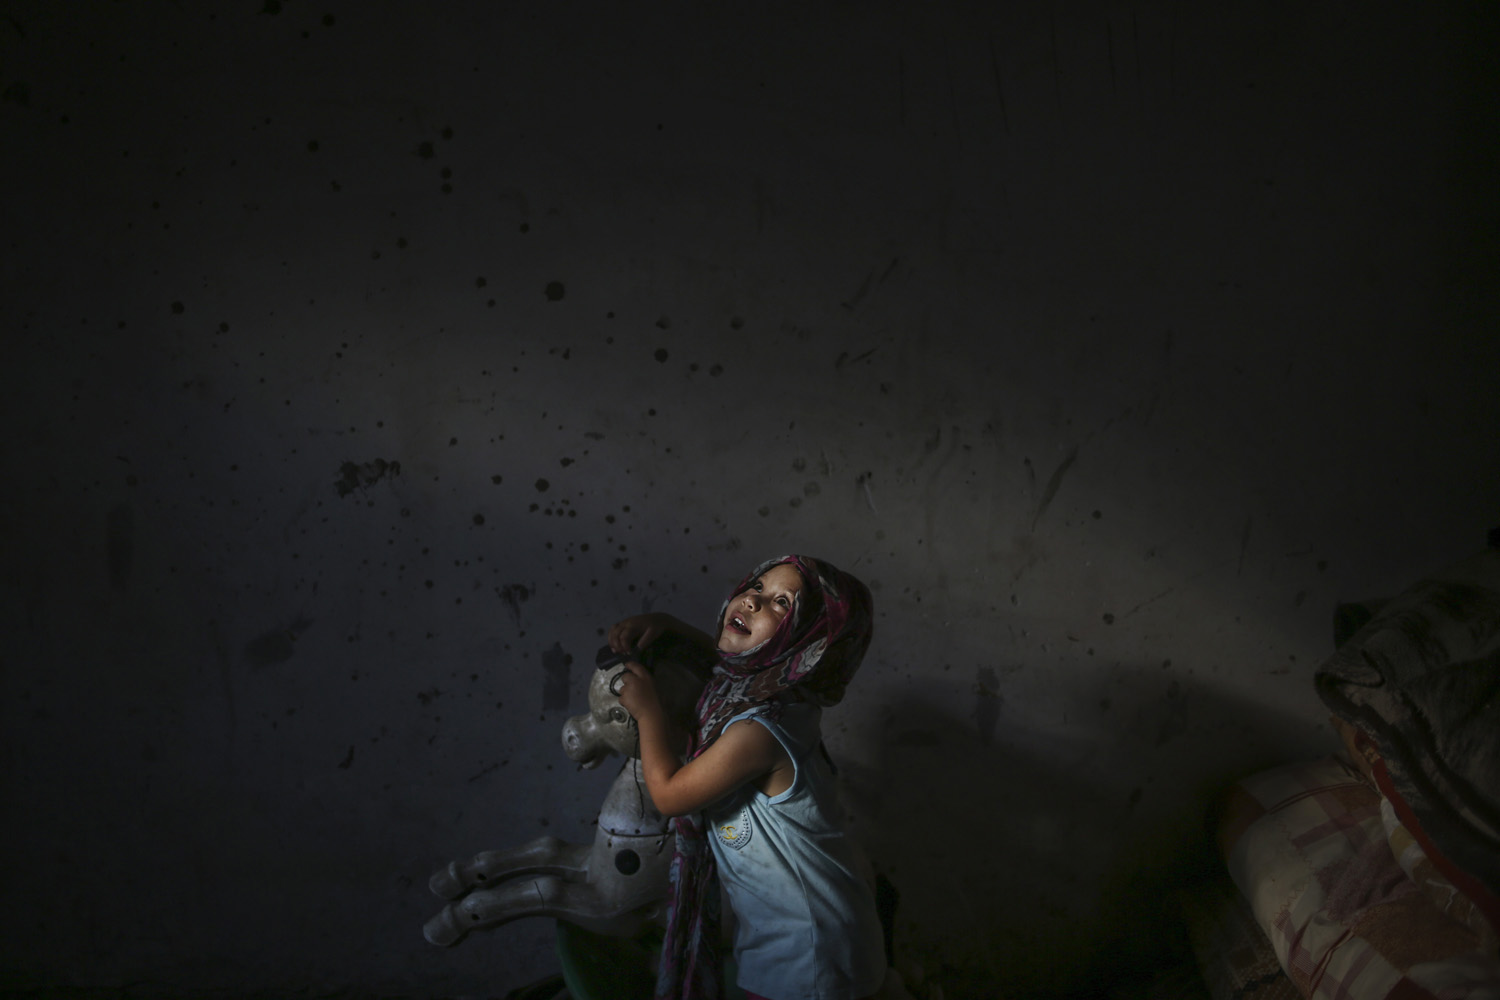 July 25, 2013. A Palestinian refugee girl, Nour Soboh, 4, plays with her toy horse in her family home in Bait Lahiya town, North Gaza Strip.